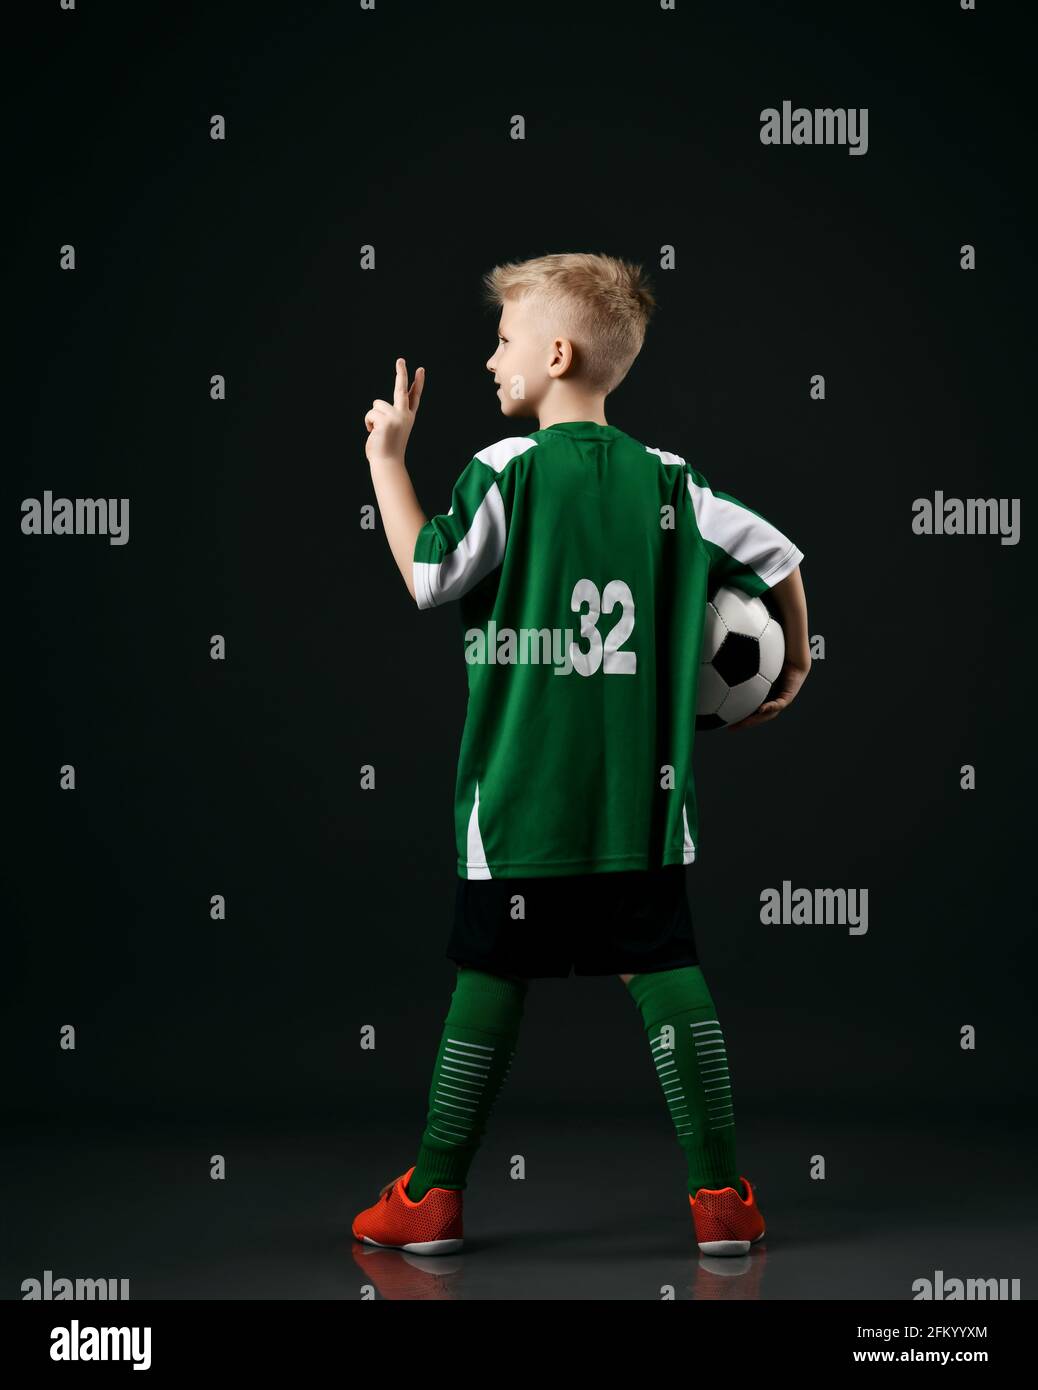 Soccer school student, teenager boy in red white striped uniform stands back to camera holding ball and gesturing V sign Stock Photo